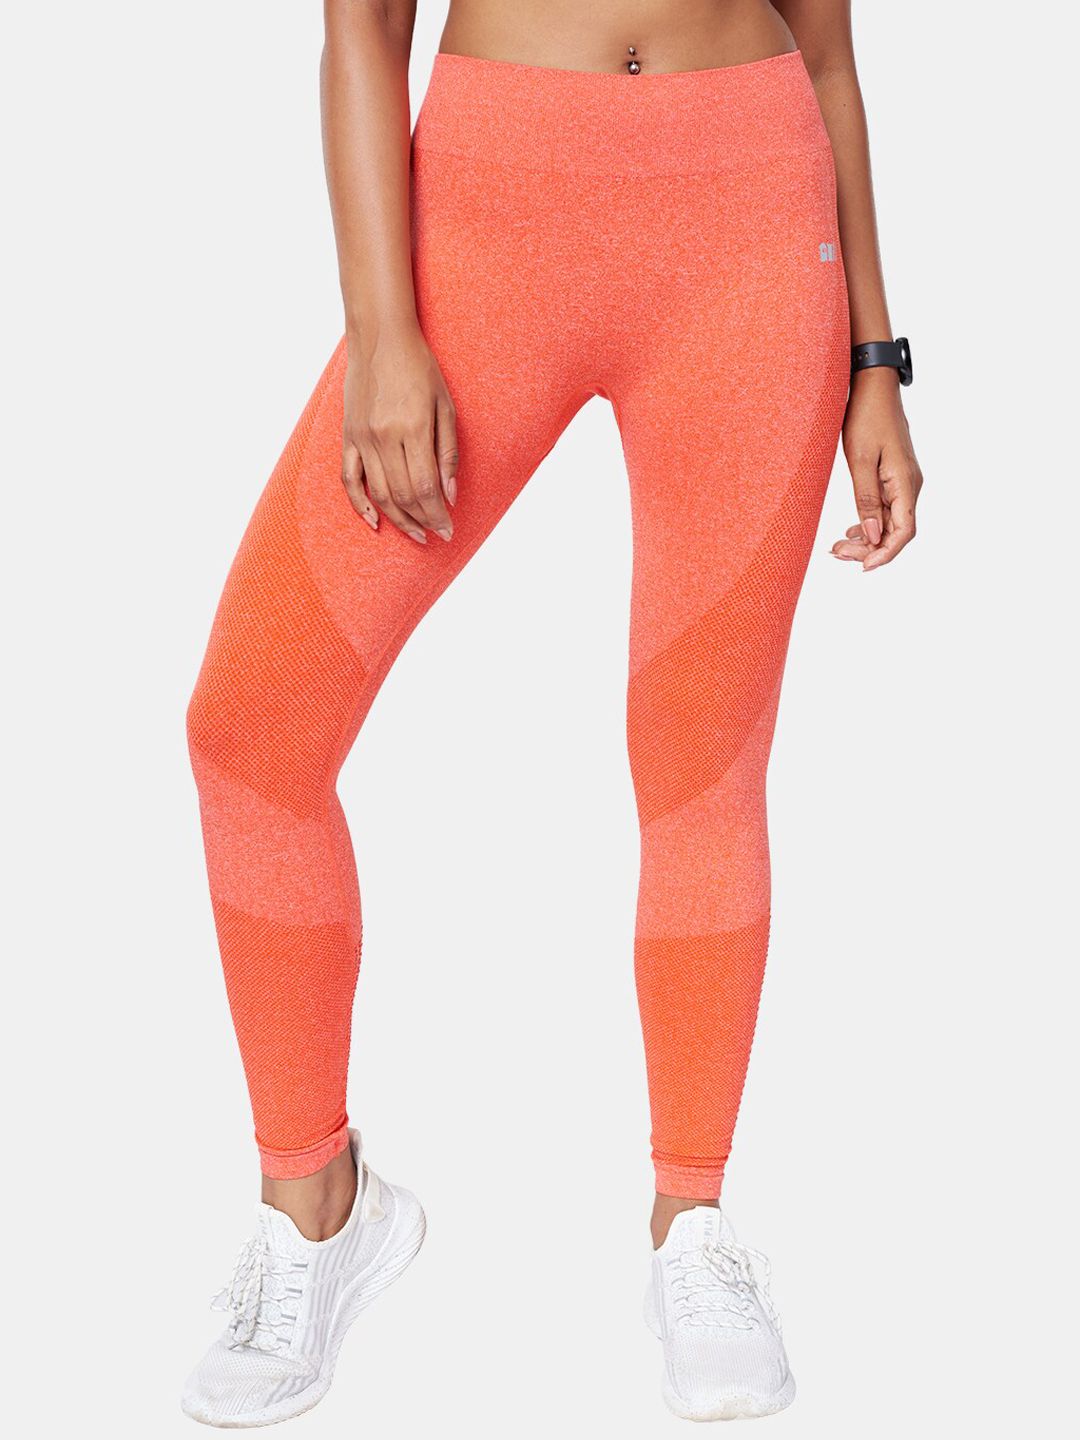 The Souled Store Women Orange Tss Active Striped Running Tights with Cut-out Hem Design Price in India